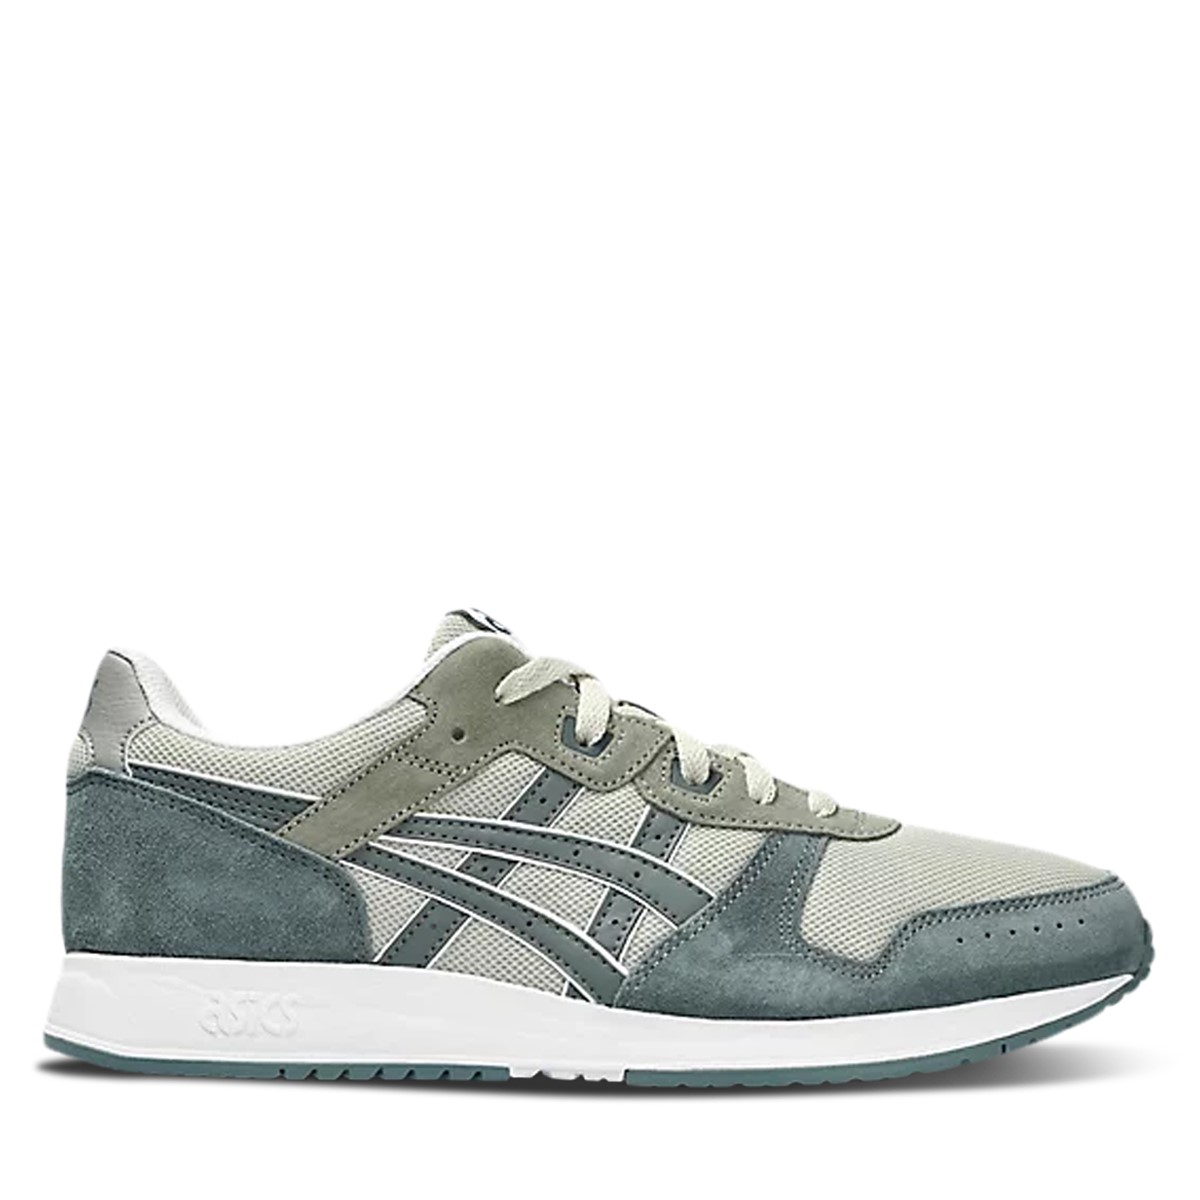 Men's Lyte Classic Sneakers in White/Sage/Grey